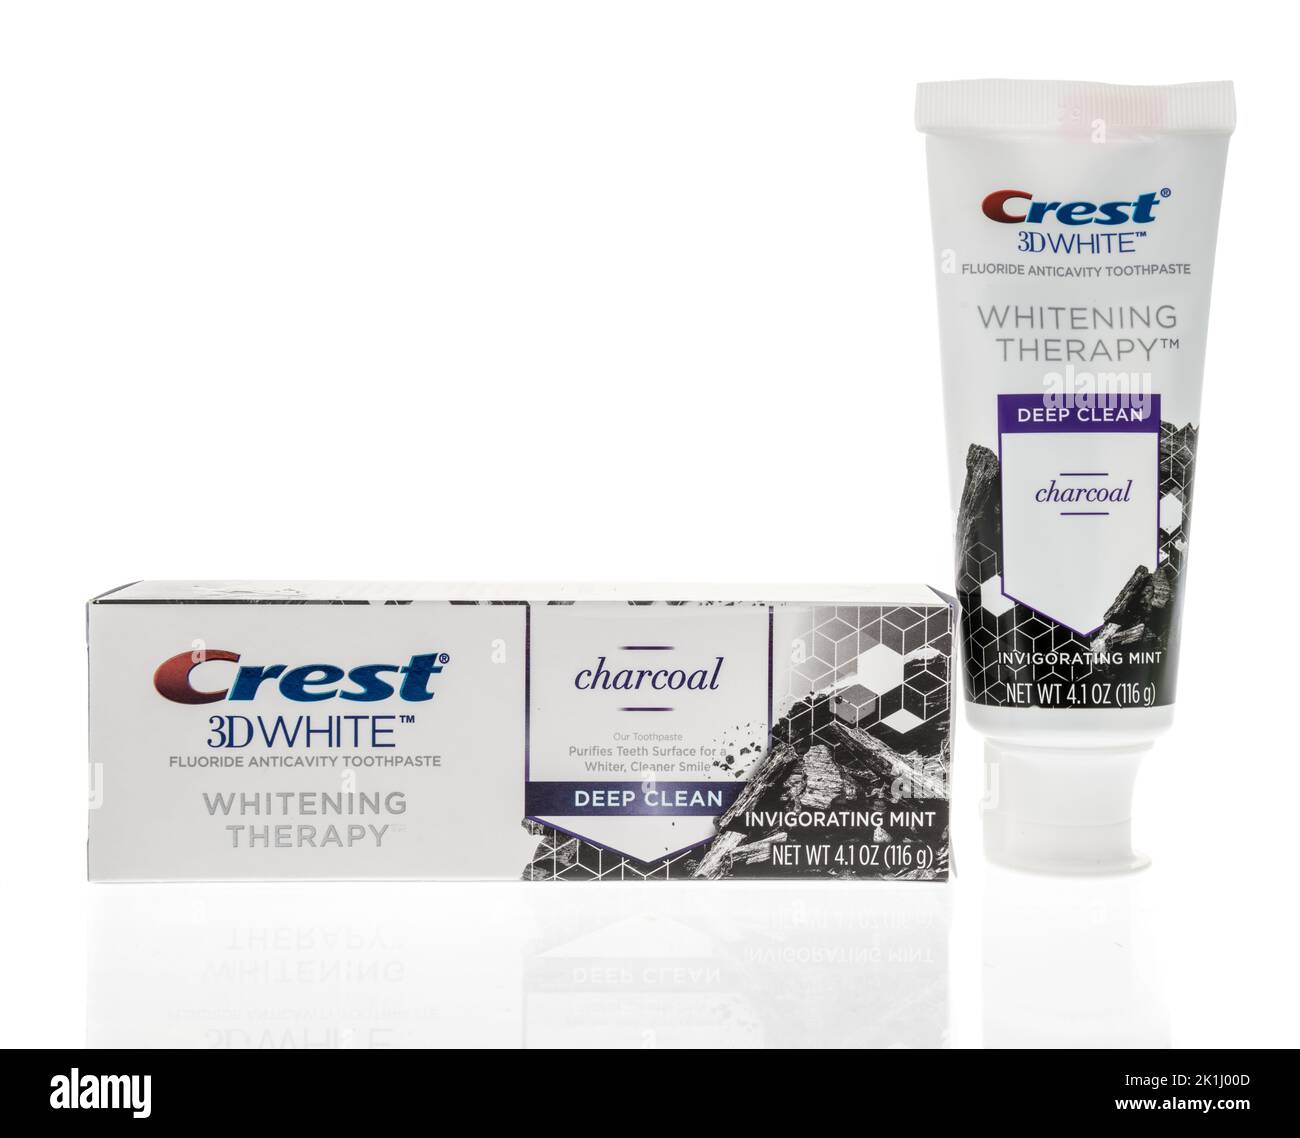 Winneconne, WI - 6 August 2022: A package of Crest 3D white whitening therapy charcoal toothpaste on an isolated background. Stock Photo